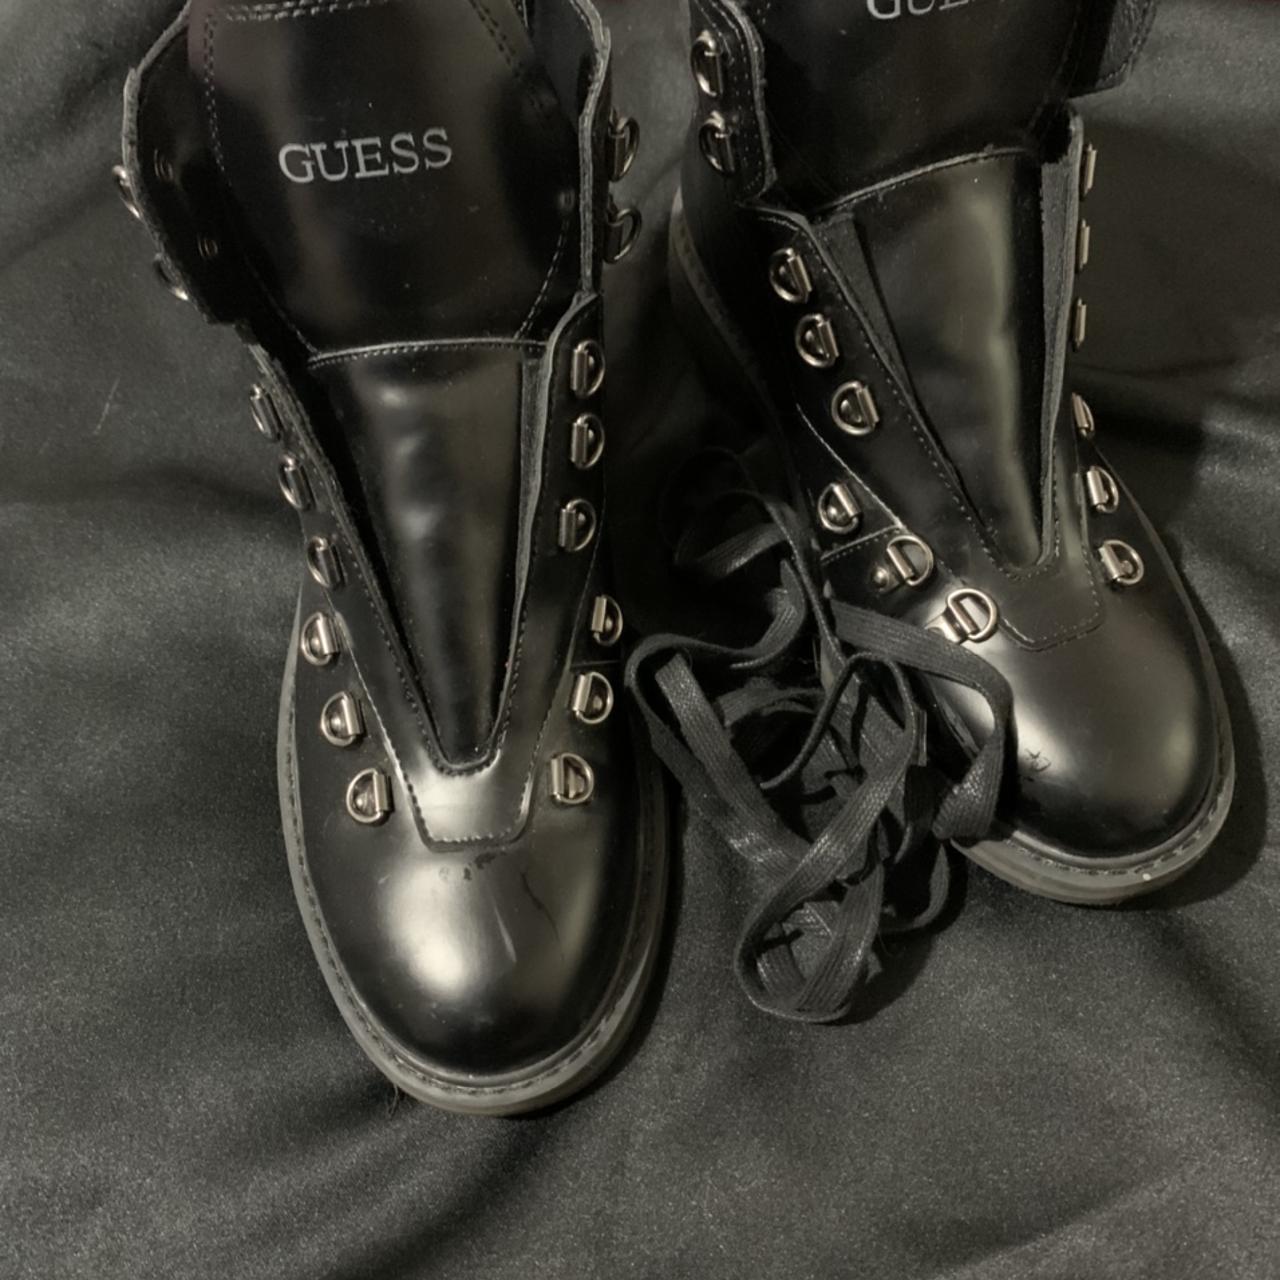 Guess boots for sale - Depop